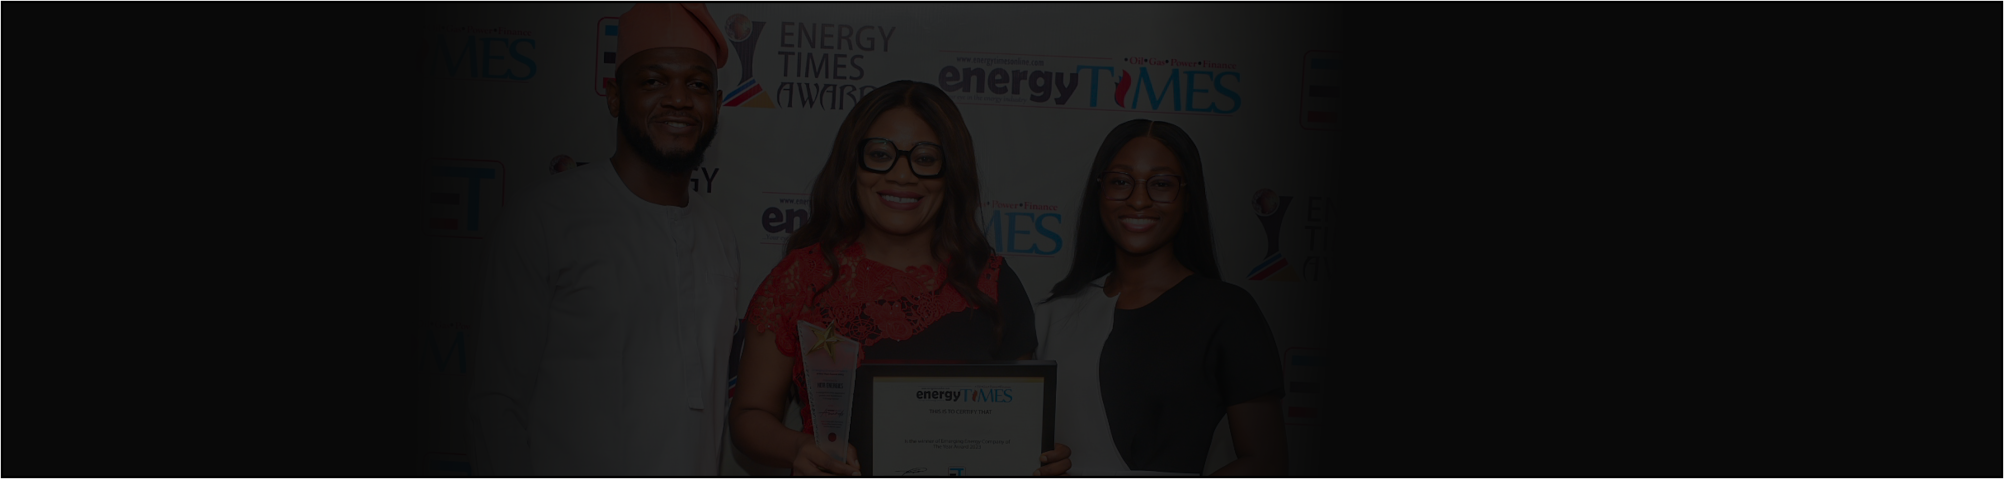 Heirs Energies Named “Emerging Energy Company of the Year” at Inaugural Energy Times Awards